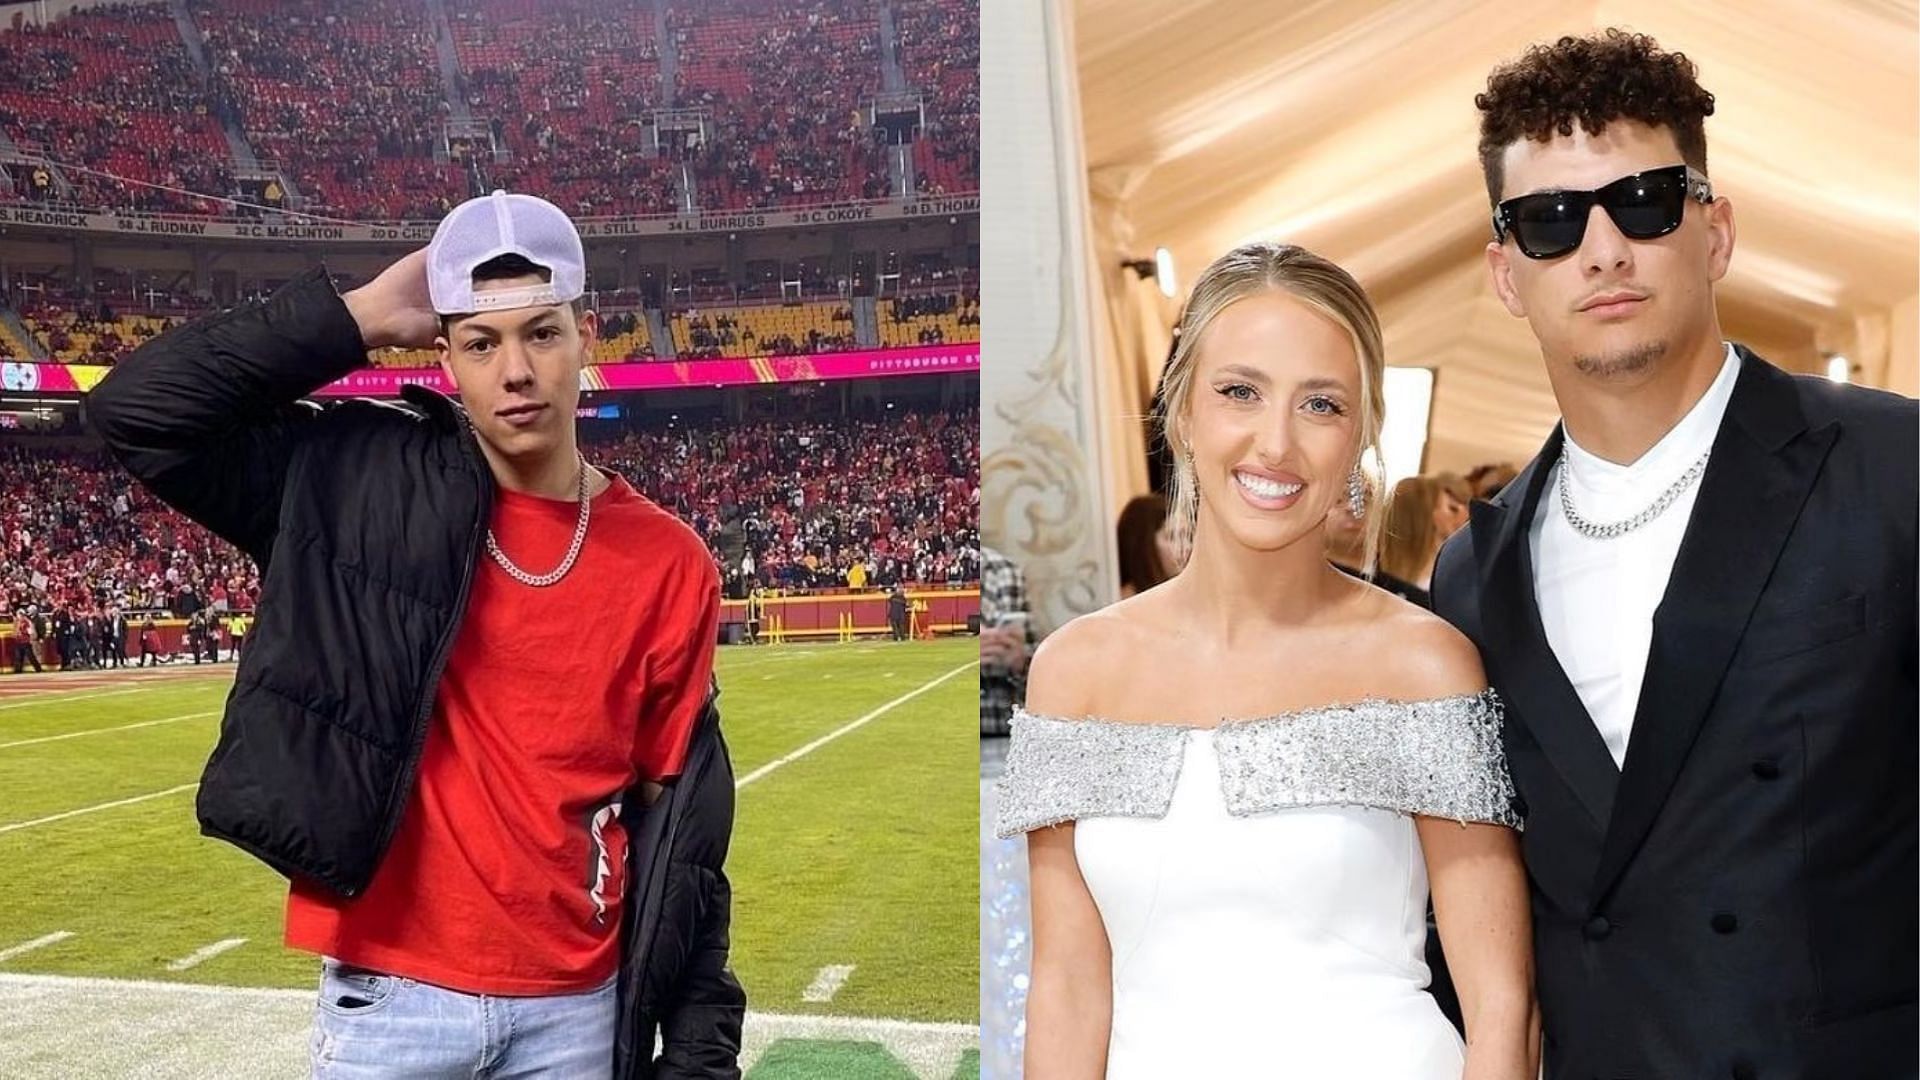 Patrick Mahomes spotted at Kentucky Derby after Jackson Mahomes arrest